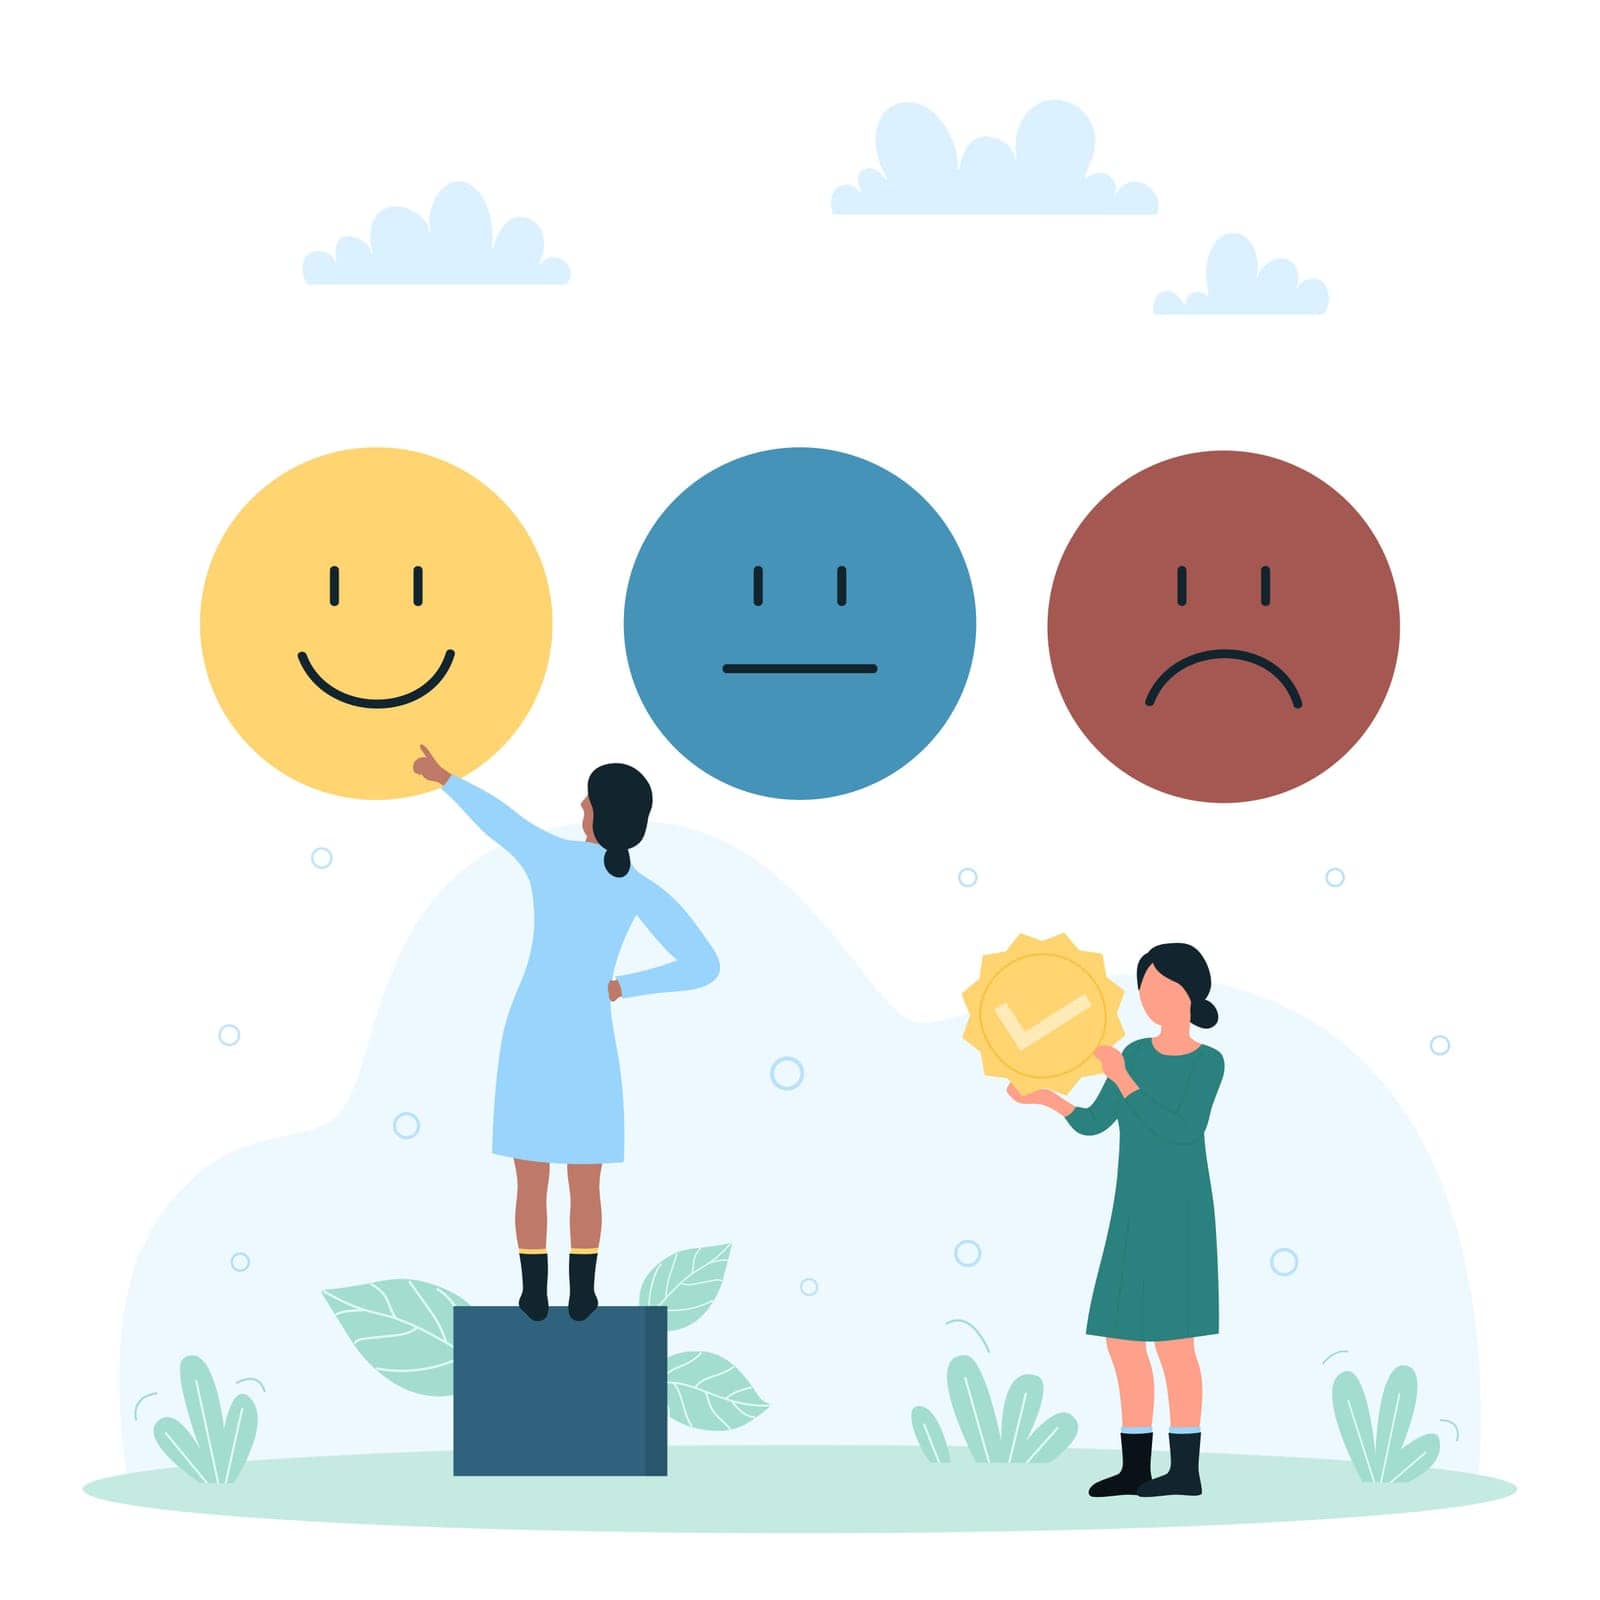 Customers survey with emoji on satisfaction of experience vector illustration. Cartoon tiny people choose happy face emoticon in electronic form, woman client holding checkmark. Feedback concept